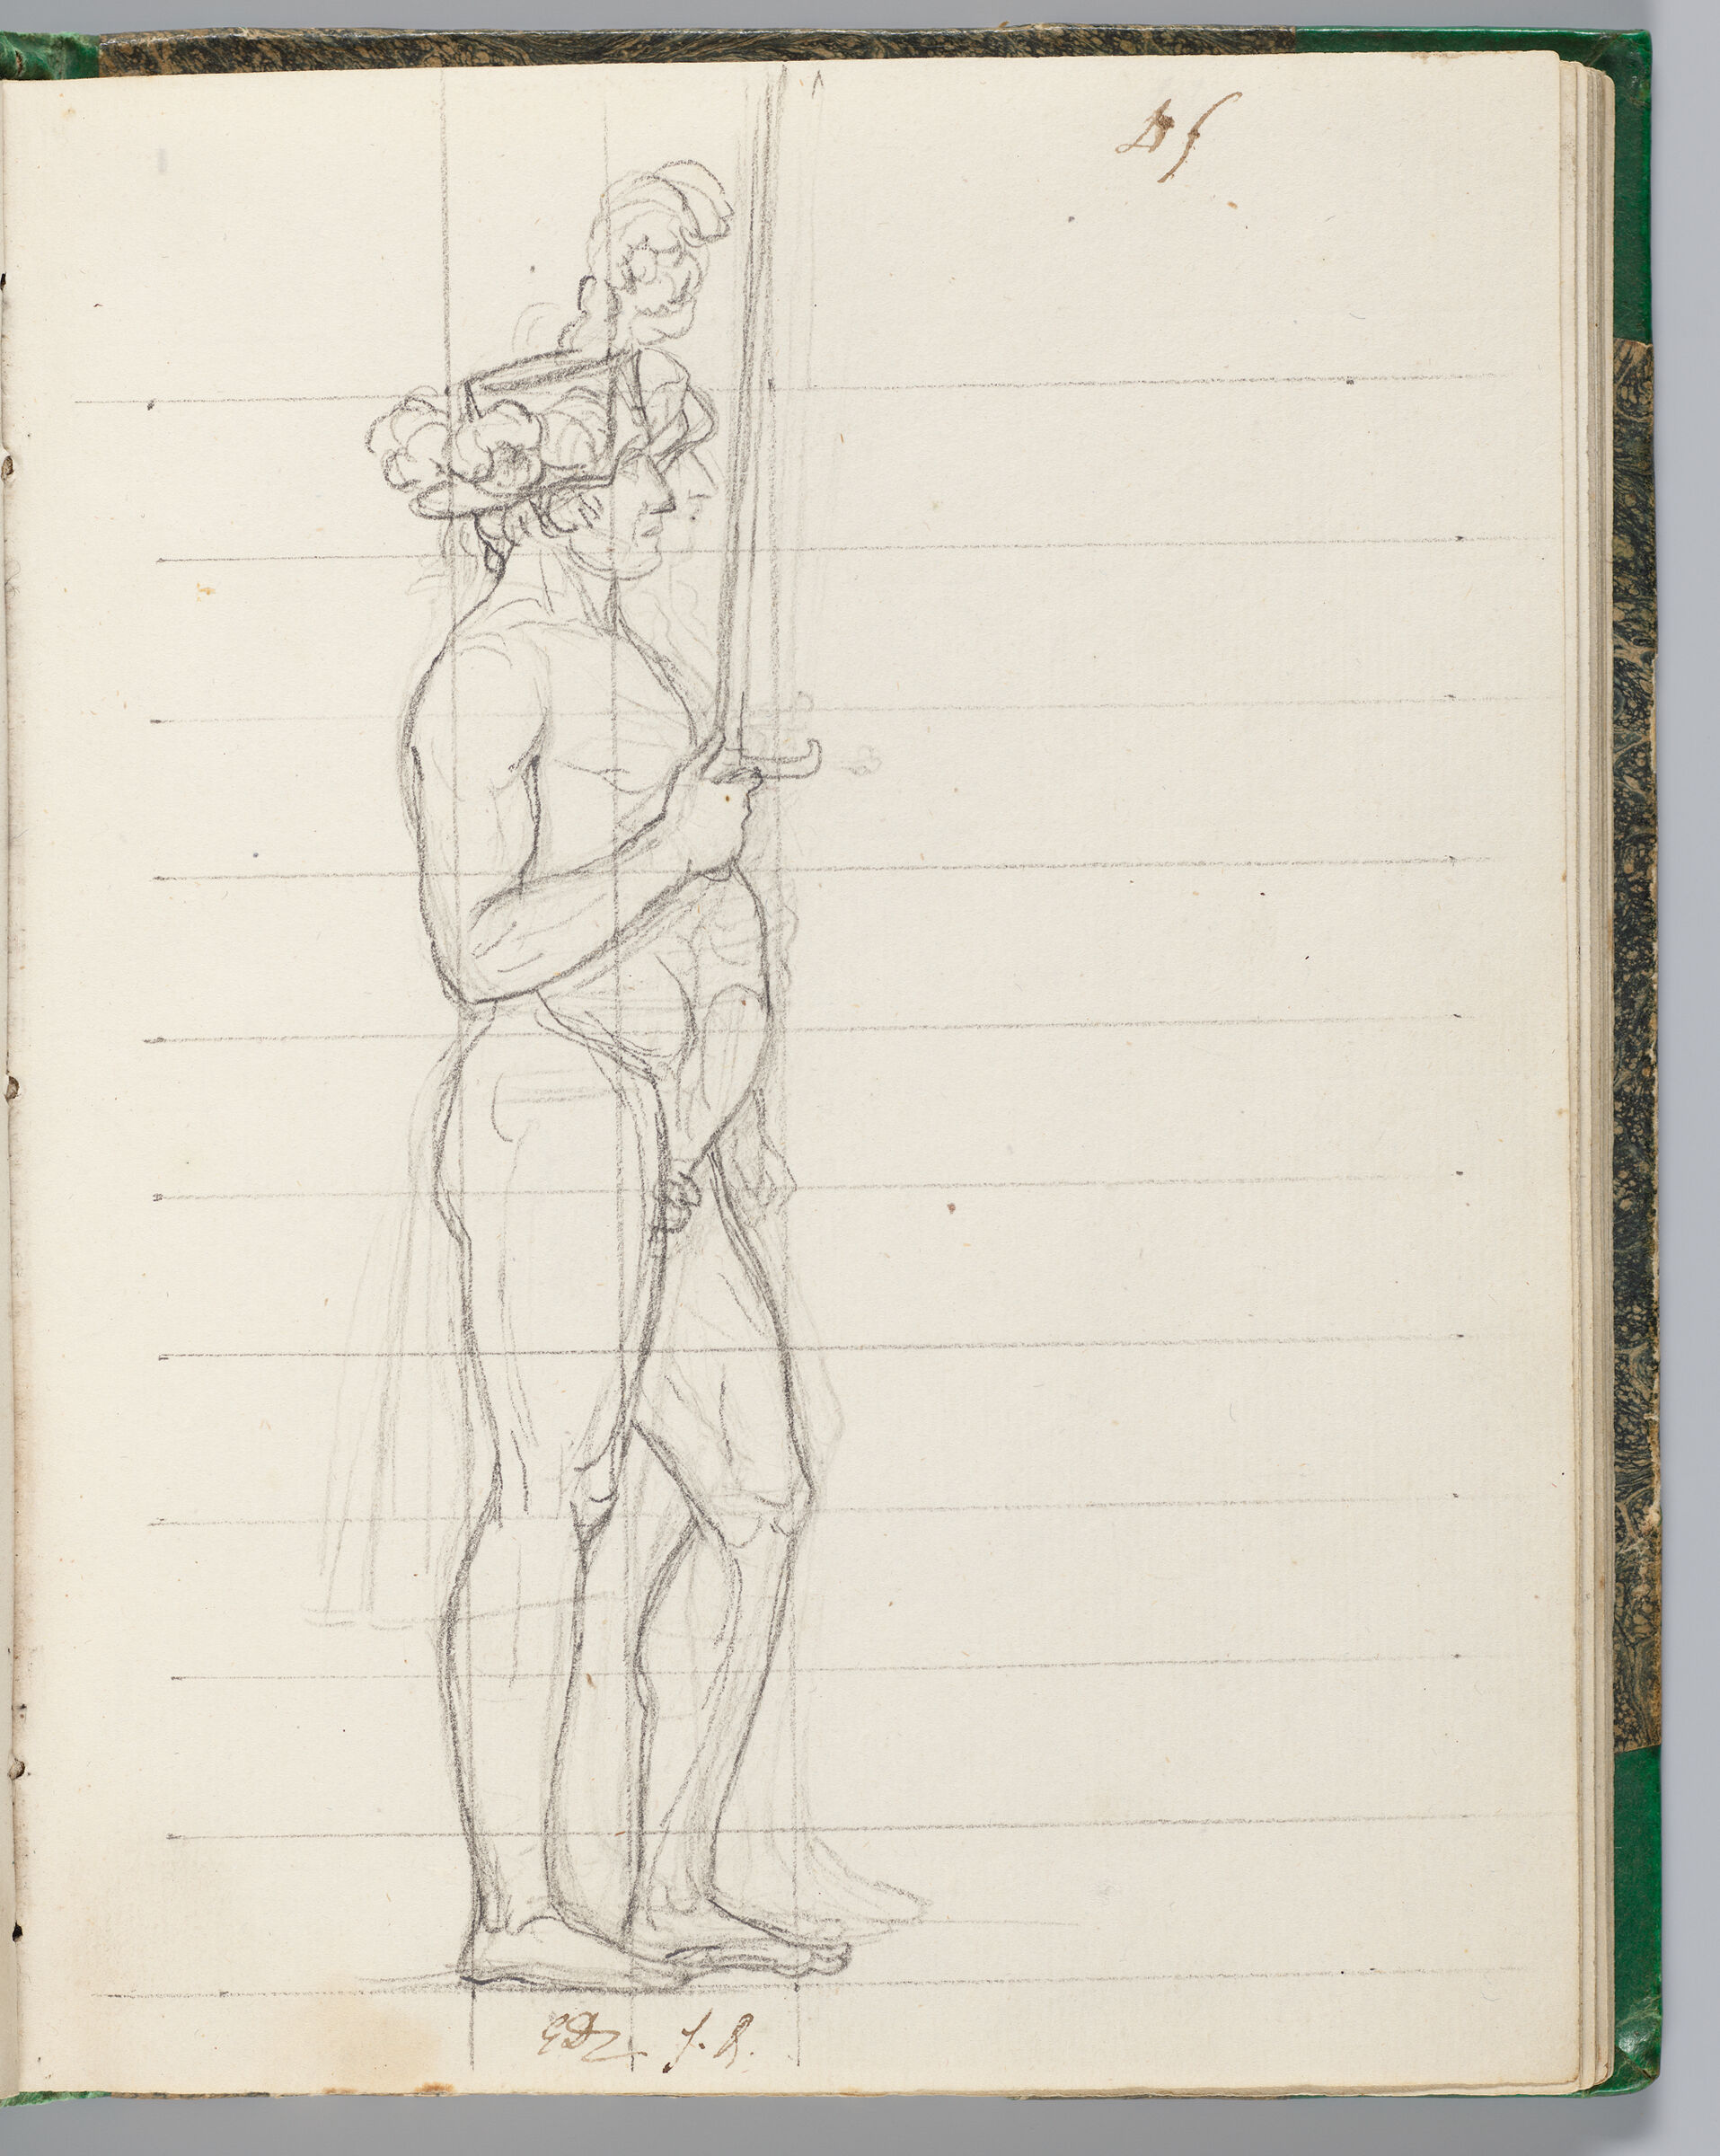 Maréchal Lefebvre, Nude Except For Plumed Hat, Holding The Sword Of Charlemagne; Verso: Blank